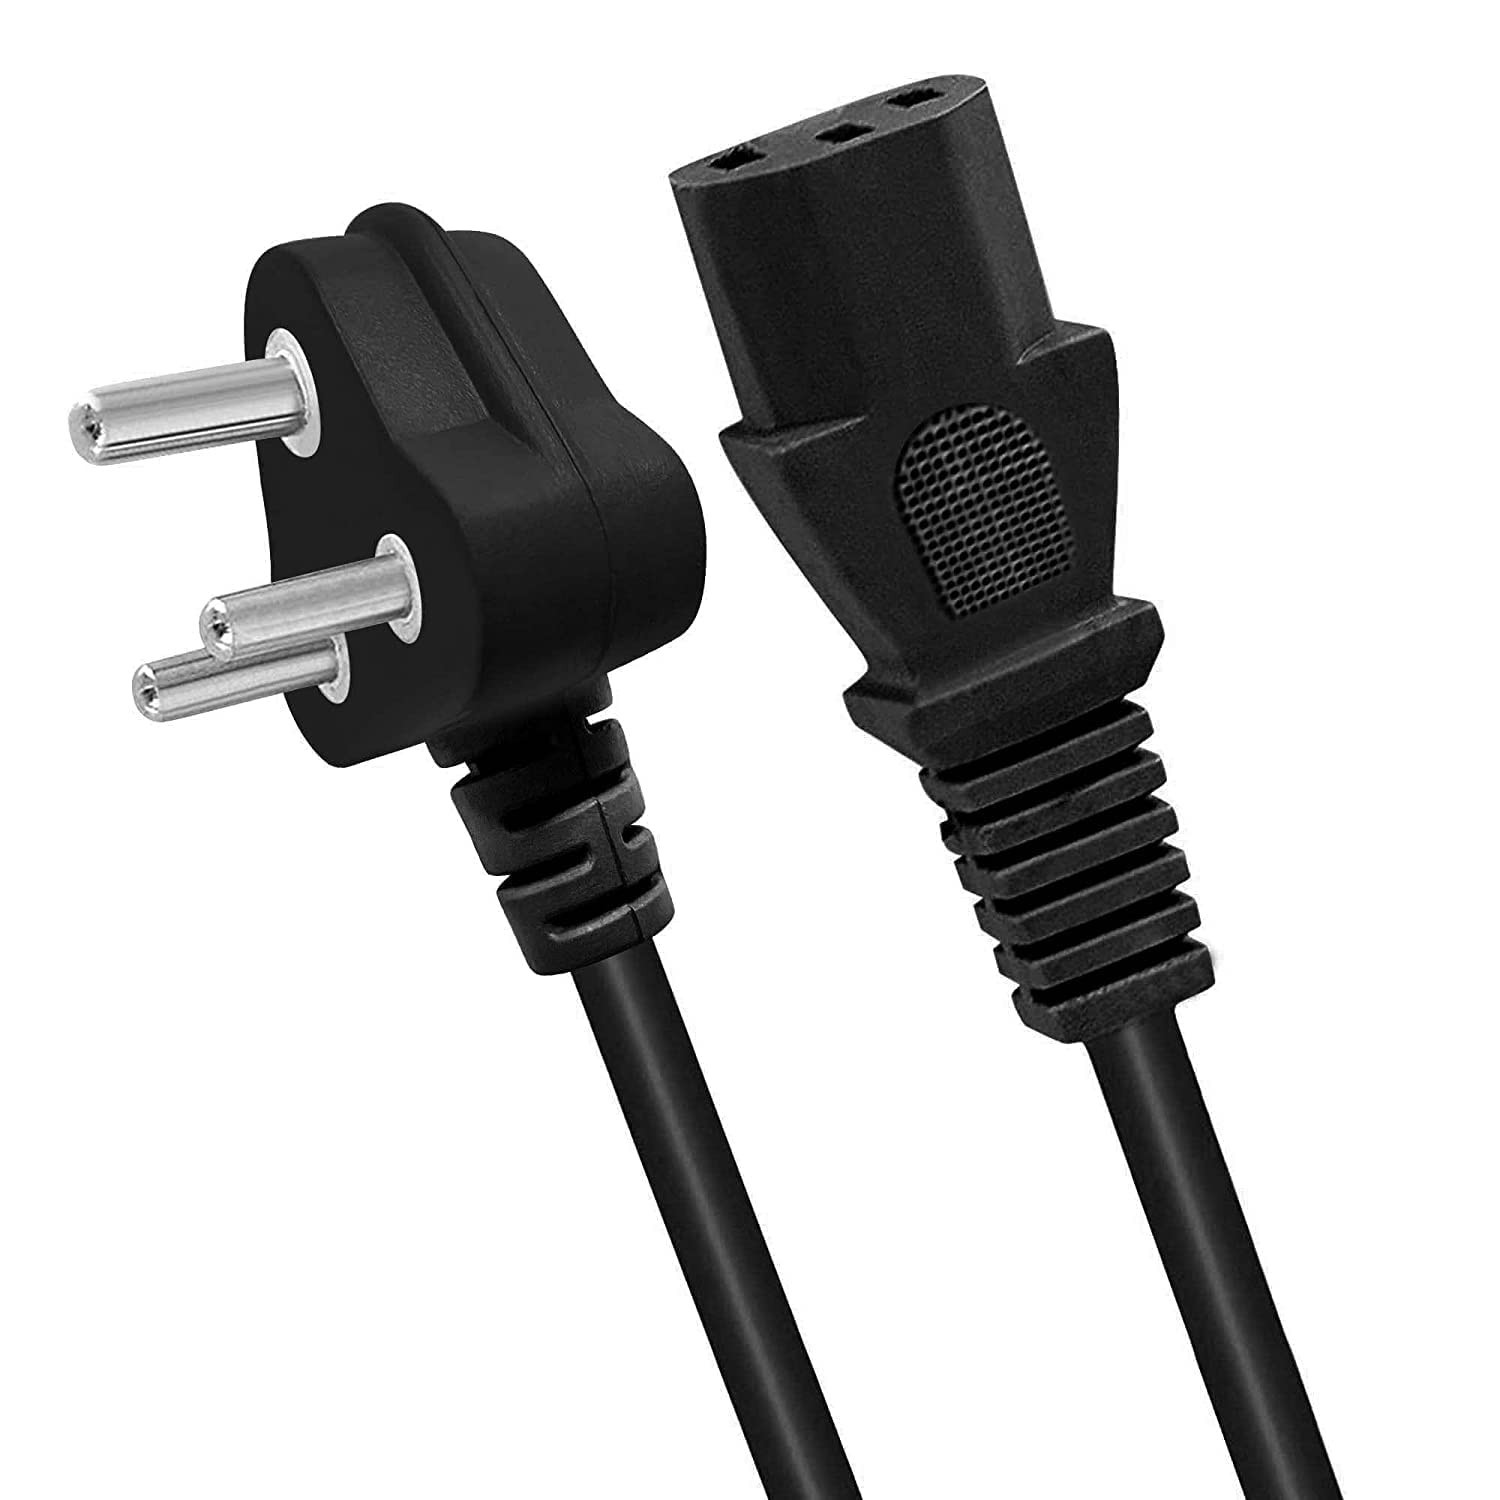 Skarsh Computer Power Cable Cord for Desktops PC and Printers/Monitor SMPS Power Cable IEC Mains Power Cable